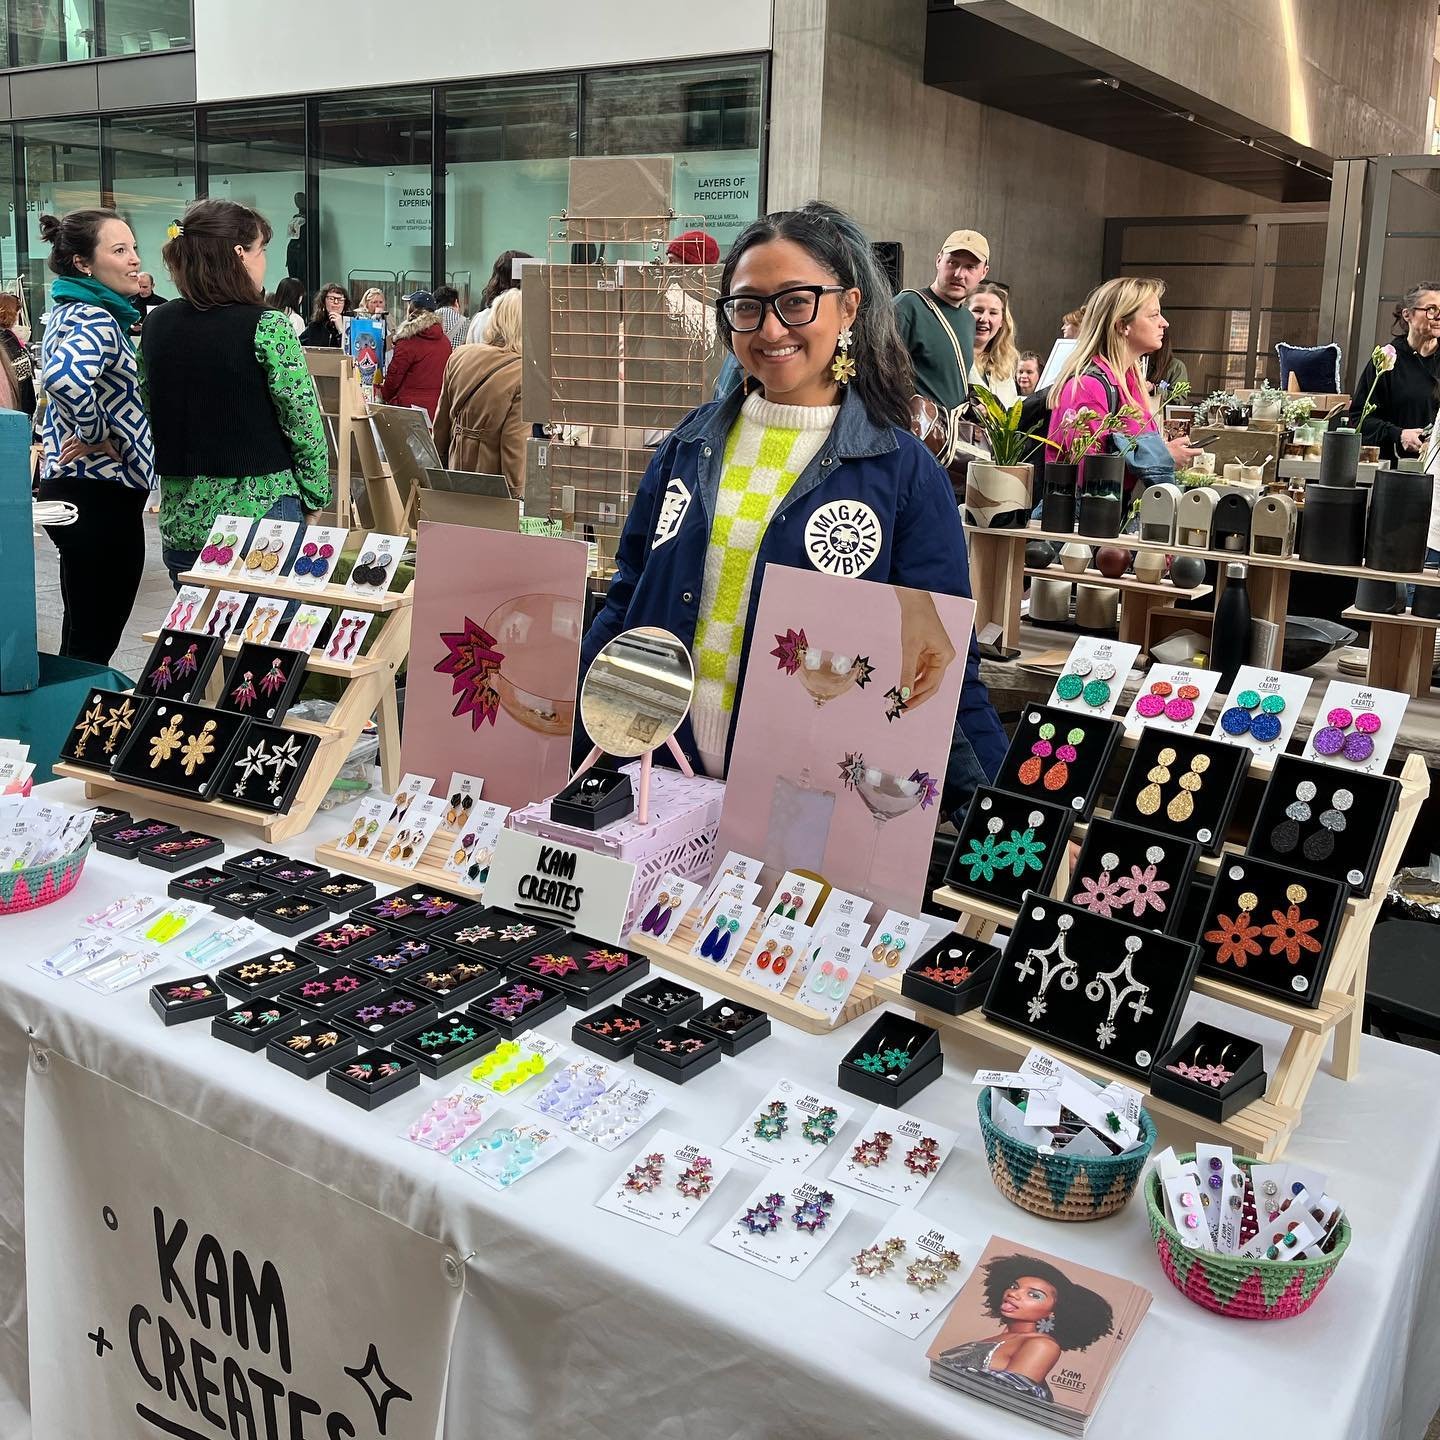 Its @craftyfoxmarket day! 🥳

There&rsquo;s a ton of things happening at @kingscrossn1c today. 
You can find us at Granary Square. We&rsquo;ll be here until 5pm ✨ Come and say hello 👋😄

#craftyfoxmarket #kingscross #granarysquare #makersmarket #lon